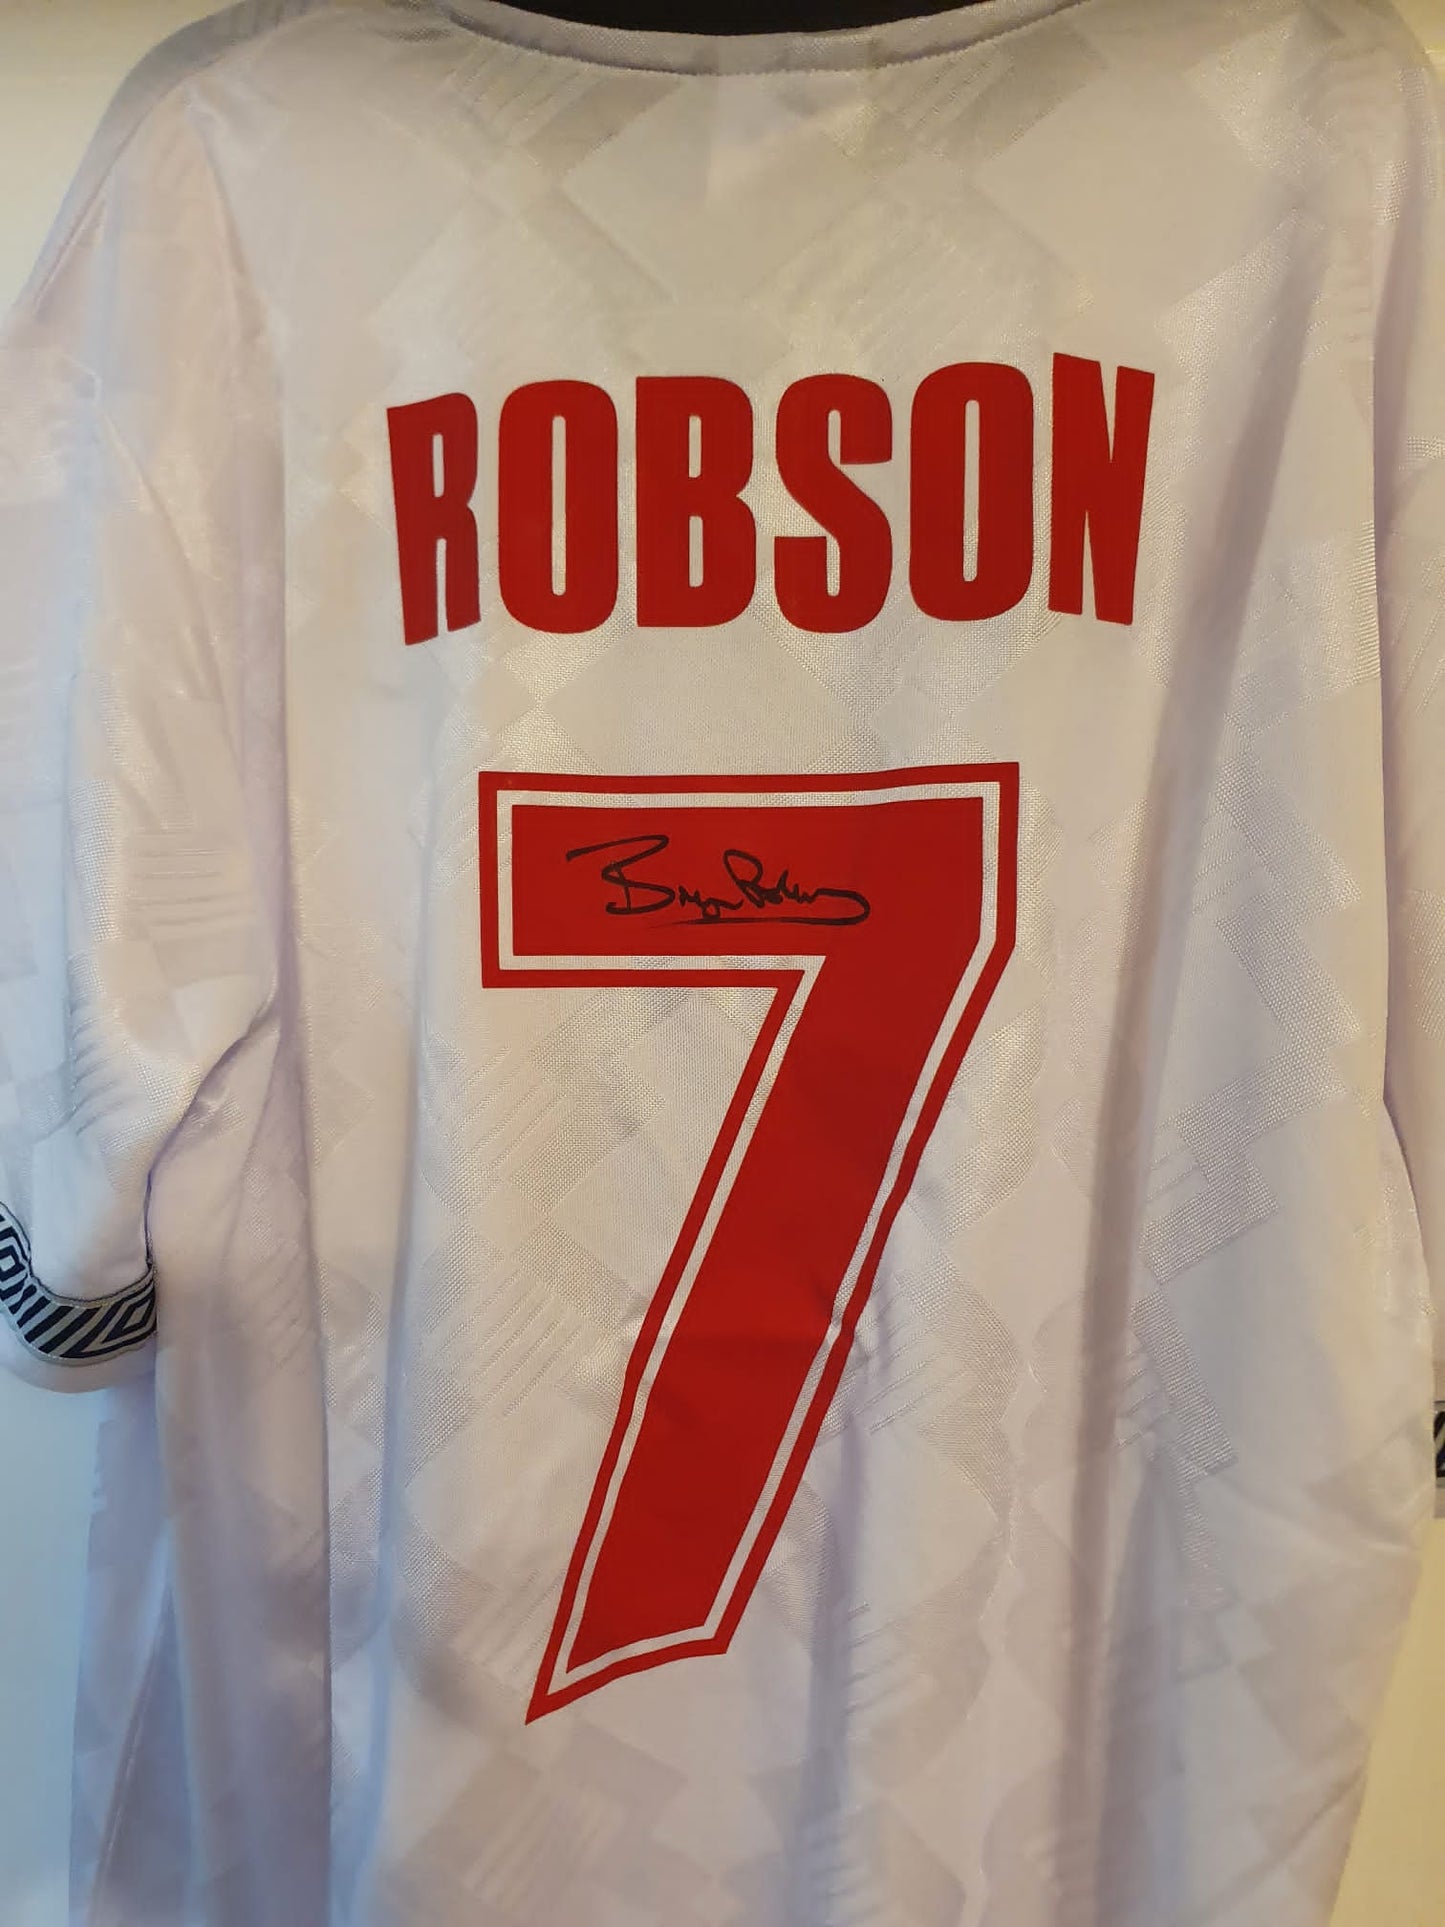 Bryan Robson Signed Manchester United Shirt